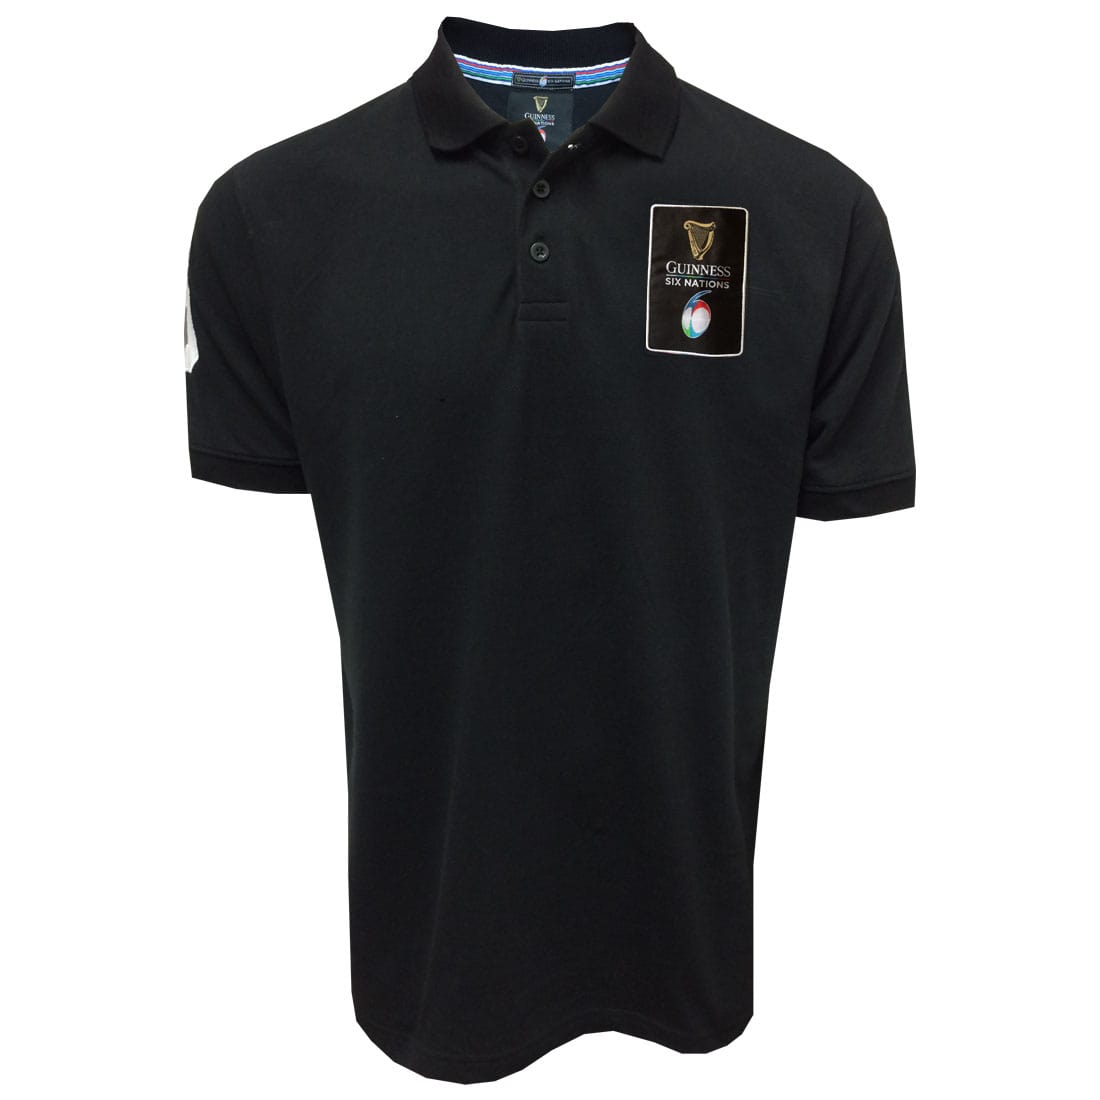 Six Nations Black Polo Shirt with a Guinness beer logo on the left chest, perfect for Six Nations rugby fans, displayed on a plain background.